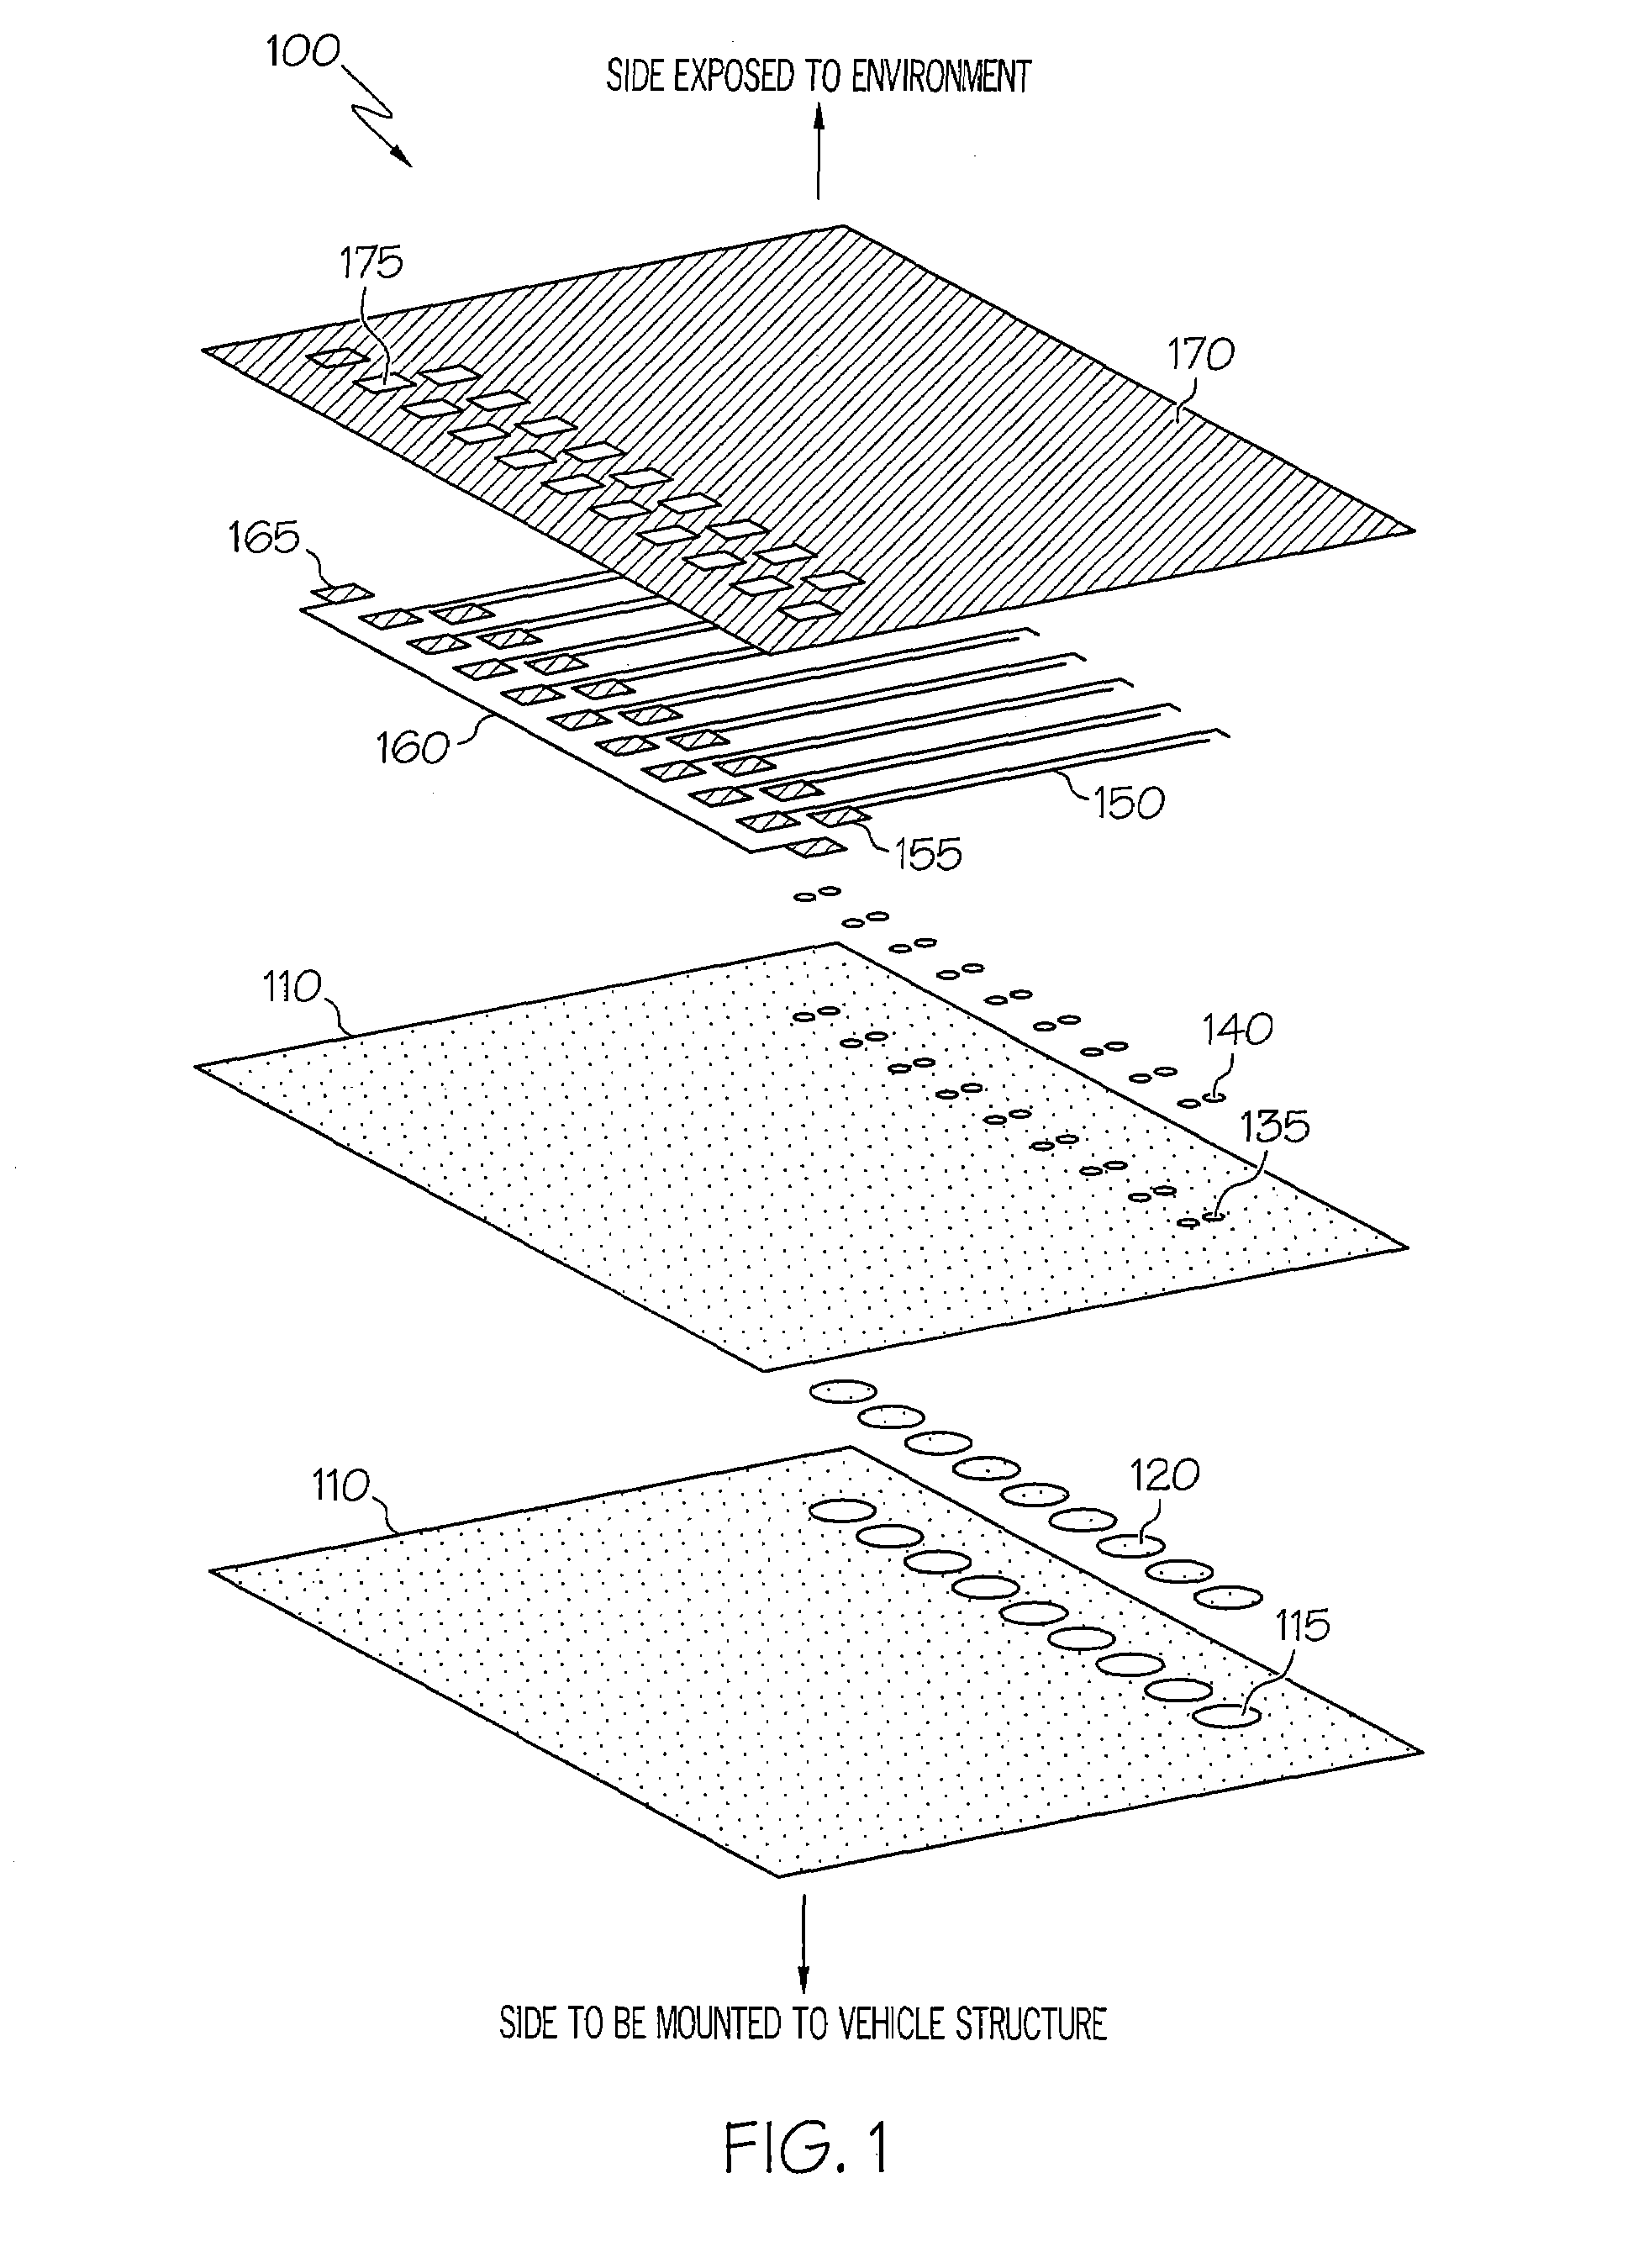 Device, system, and method for structural health monitoring